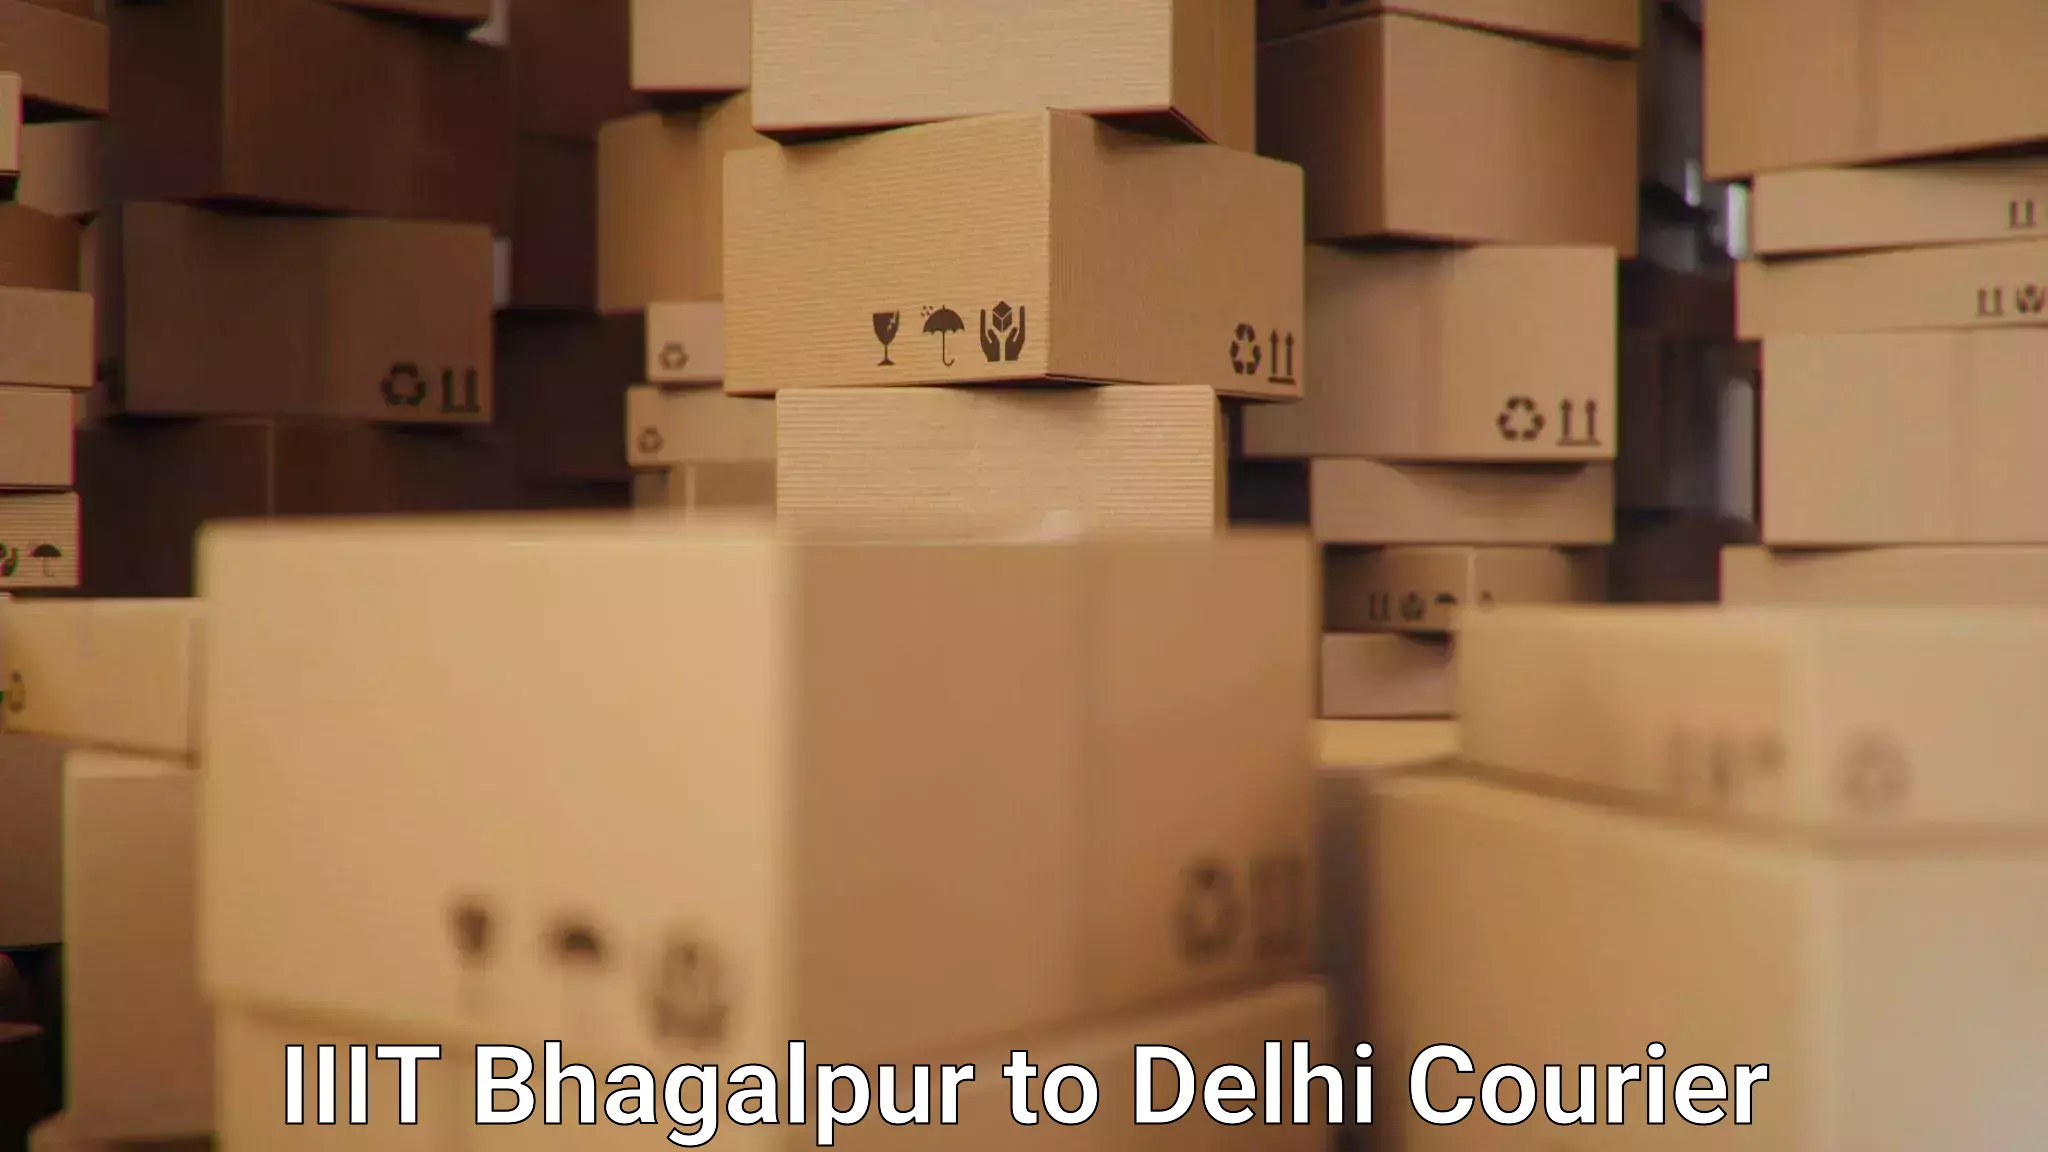 Full-service courier options IIIT Bhagalpur to East Delhi